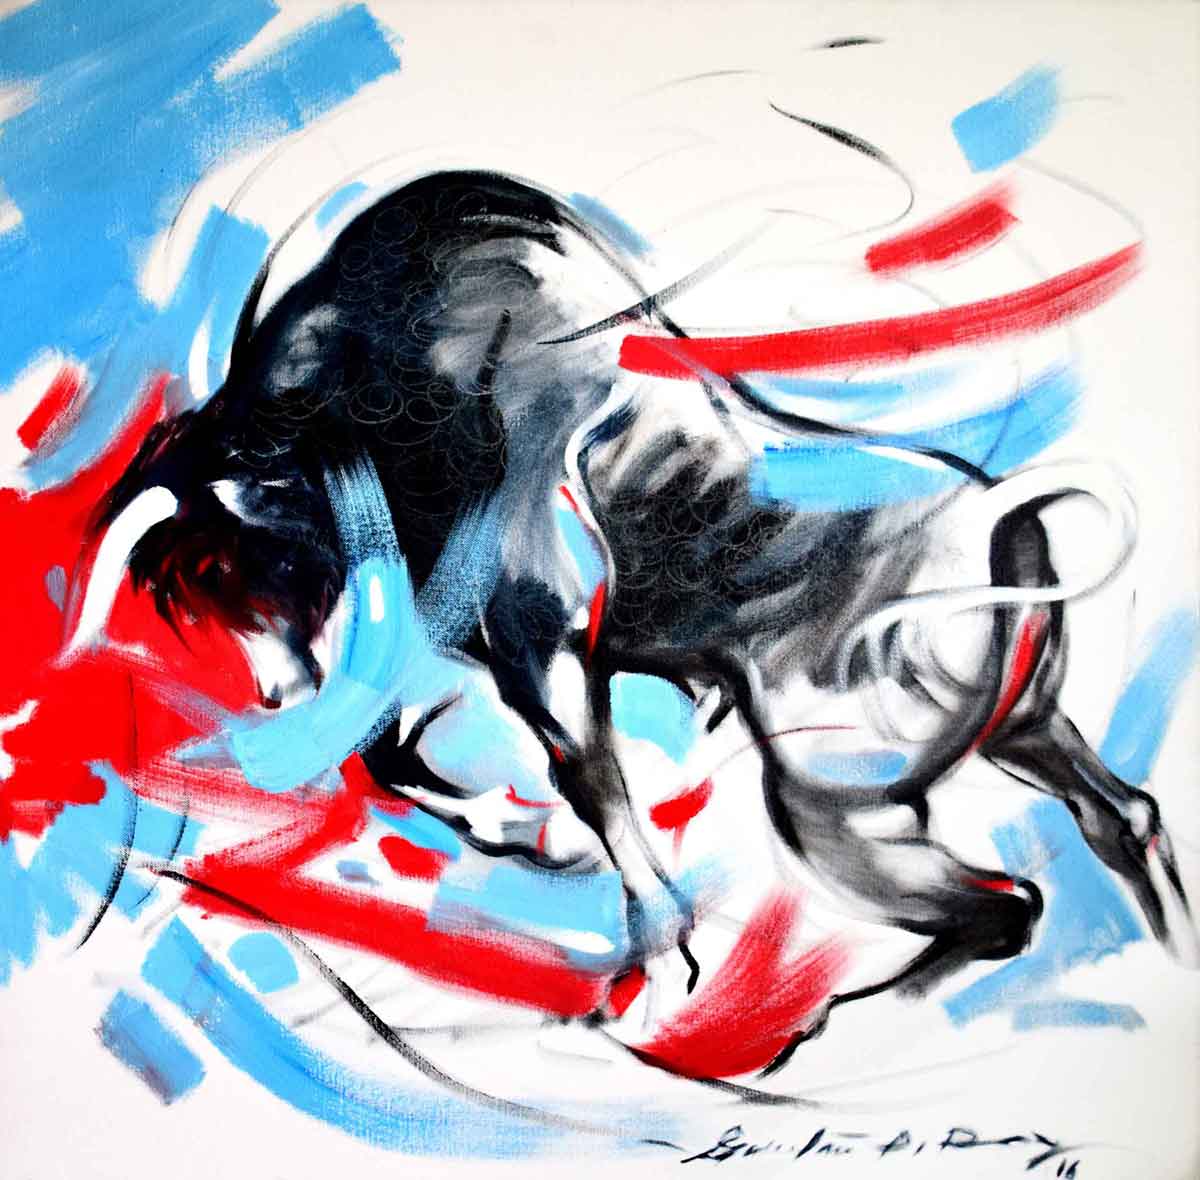 Figurative Painting with Oil on Canvas "Bull-1" art by Gautam Partho Roy